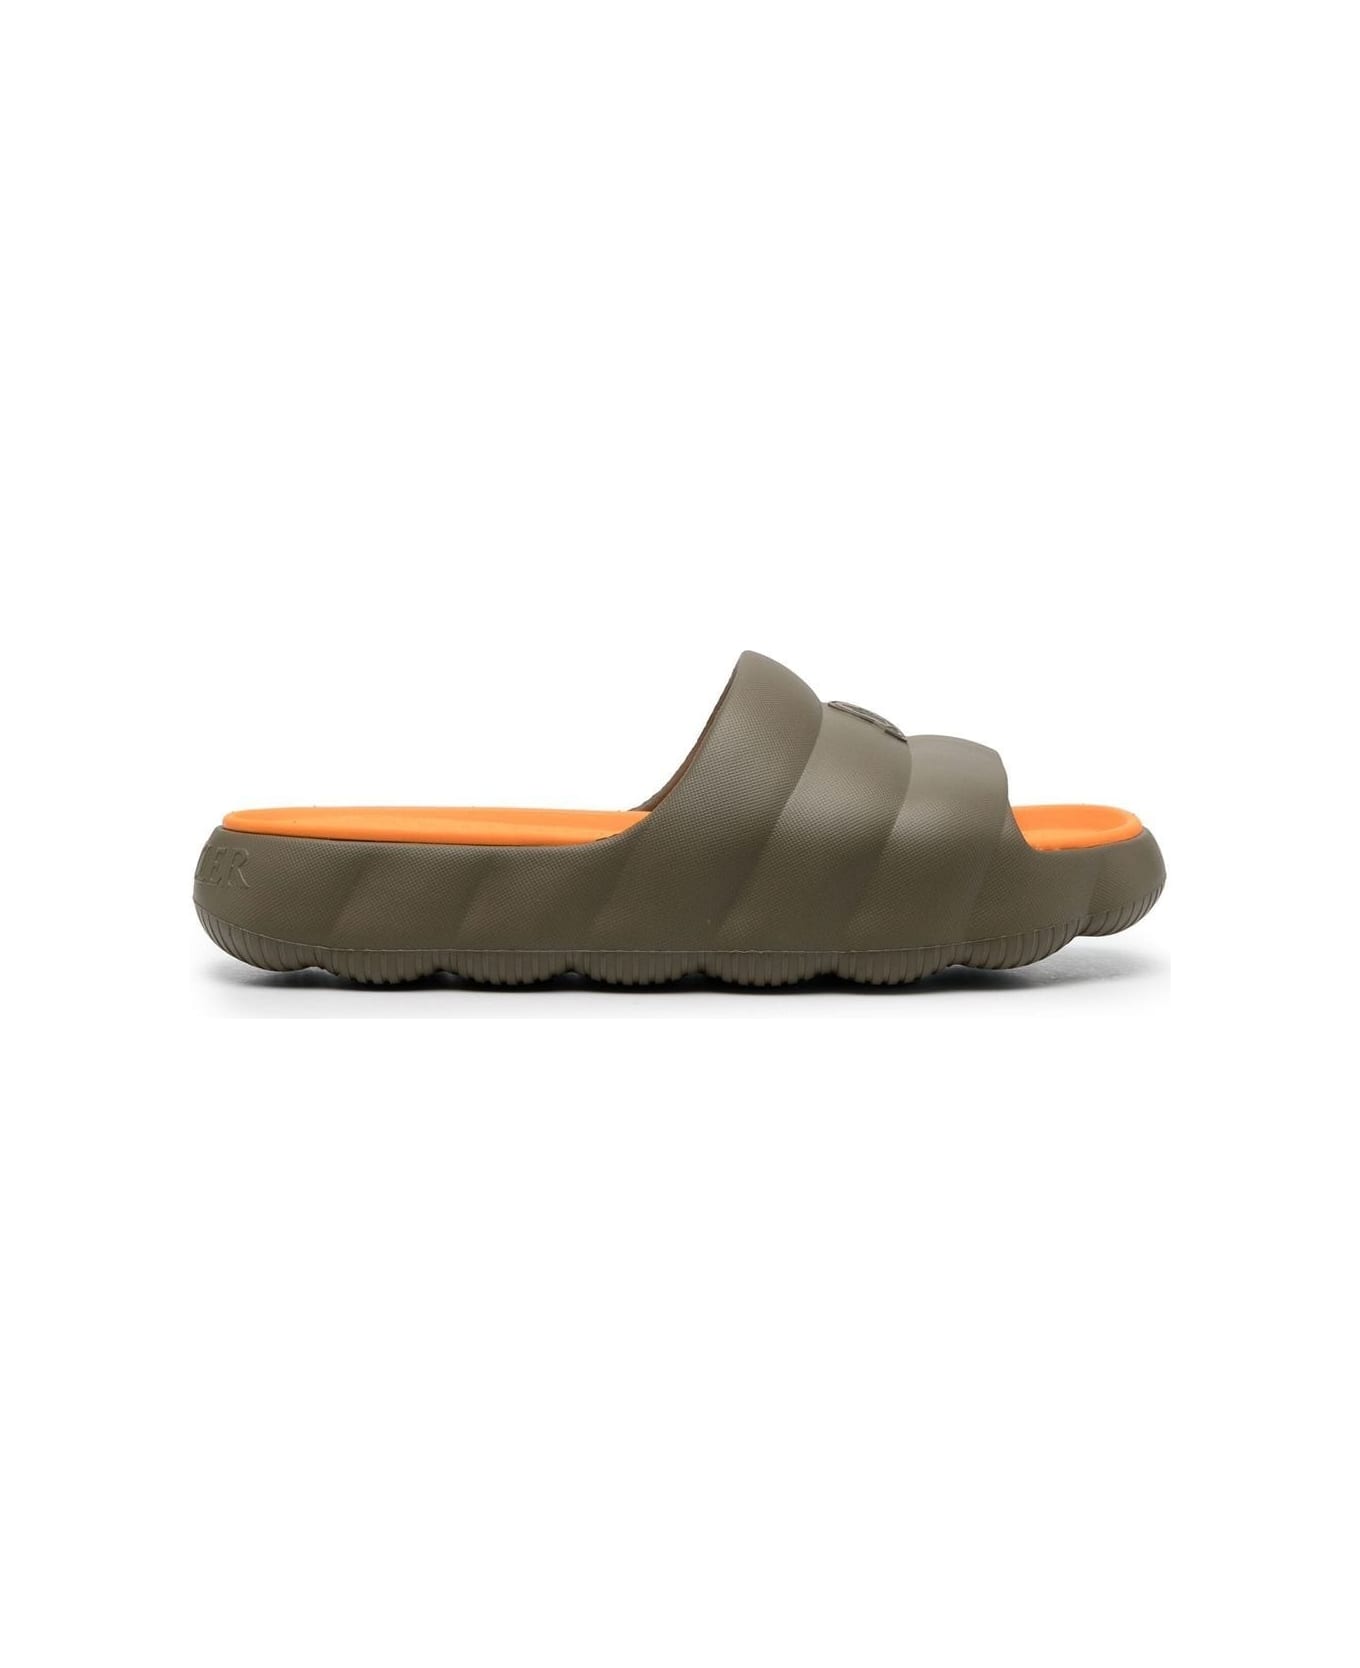 Moncler Orange And Military Green Lilo Slides - BROWN